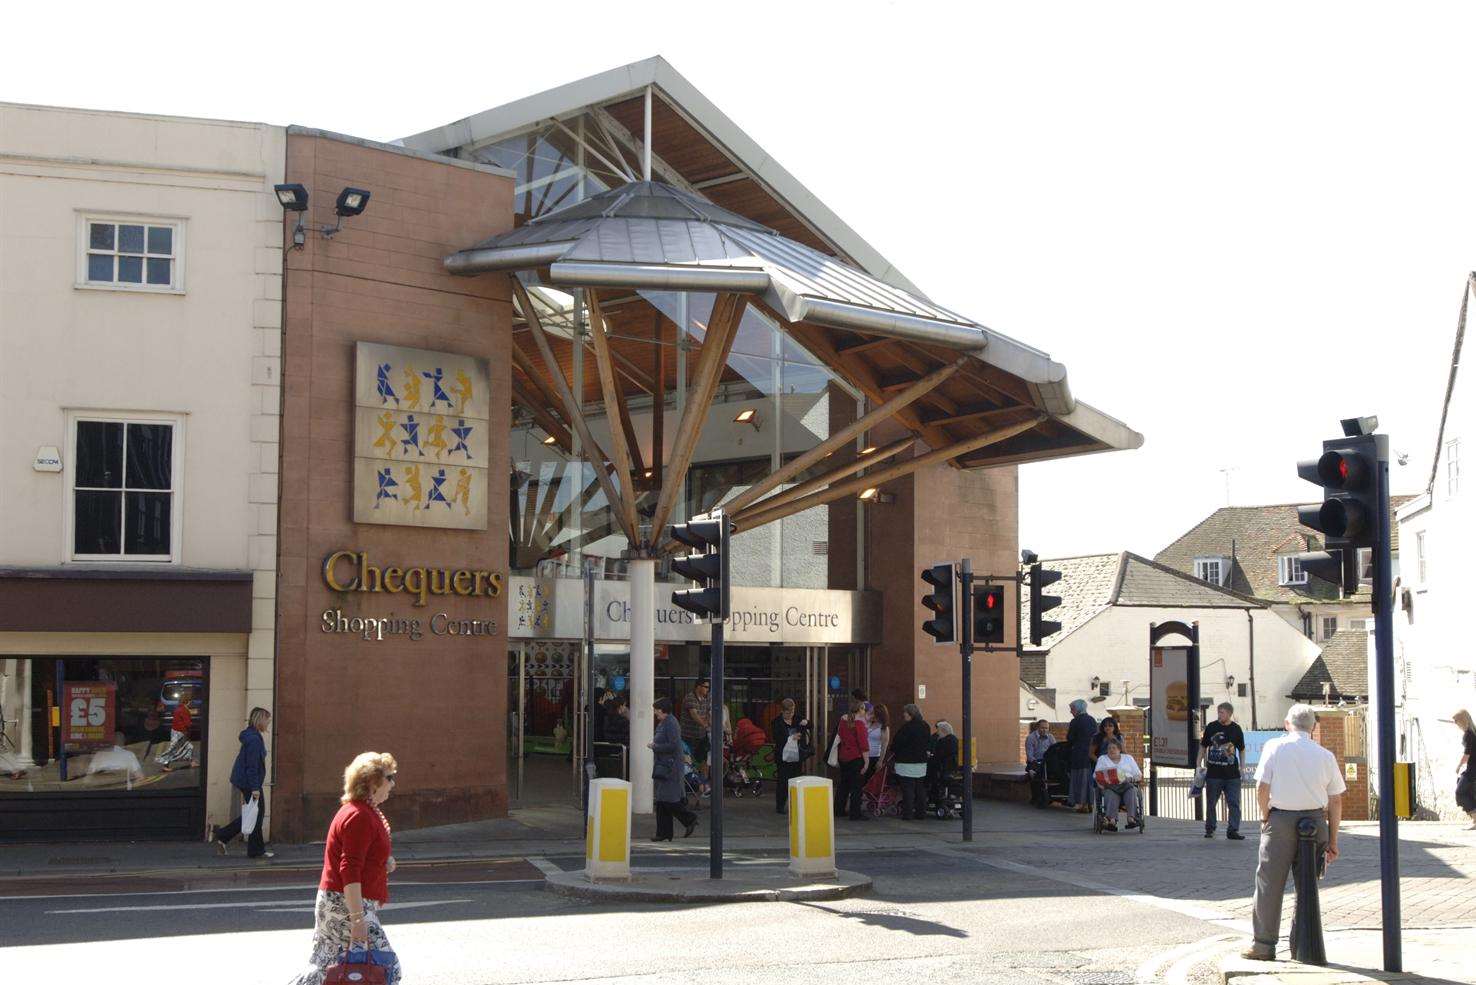 The Mall Chequers shopping centre